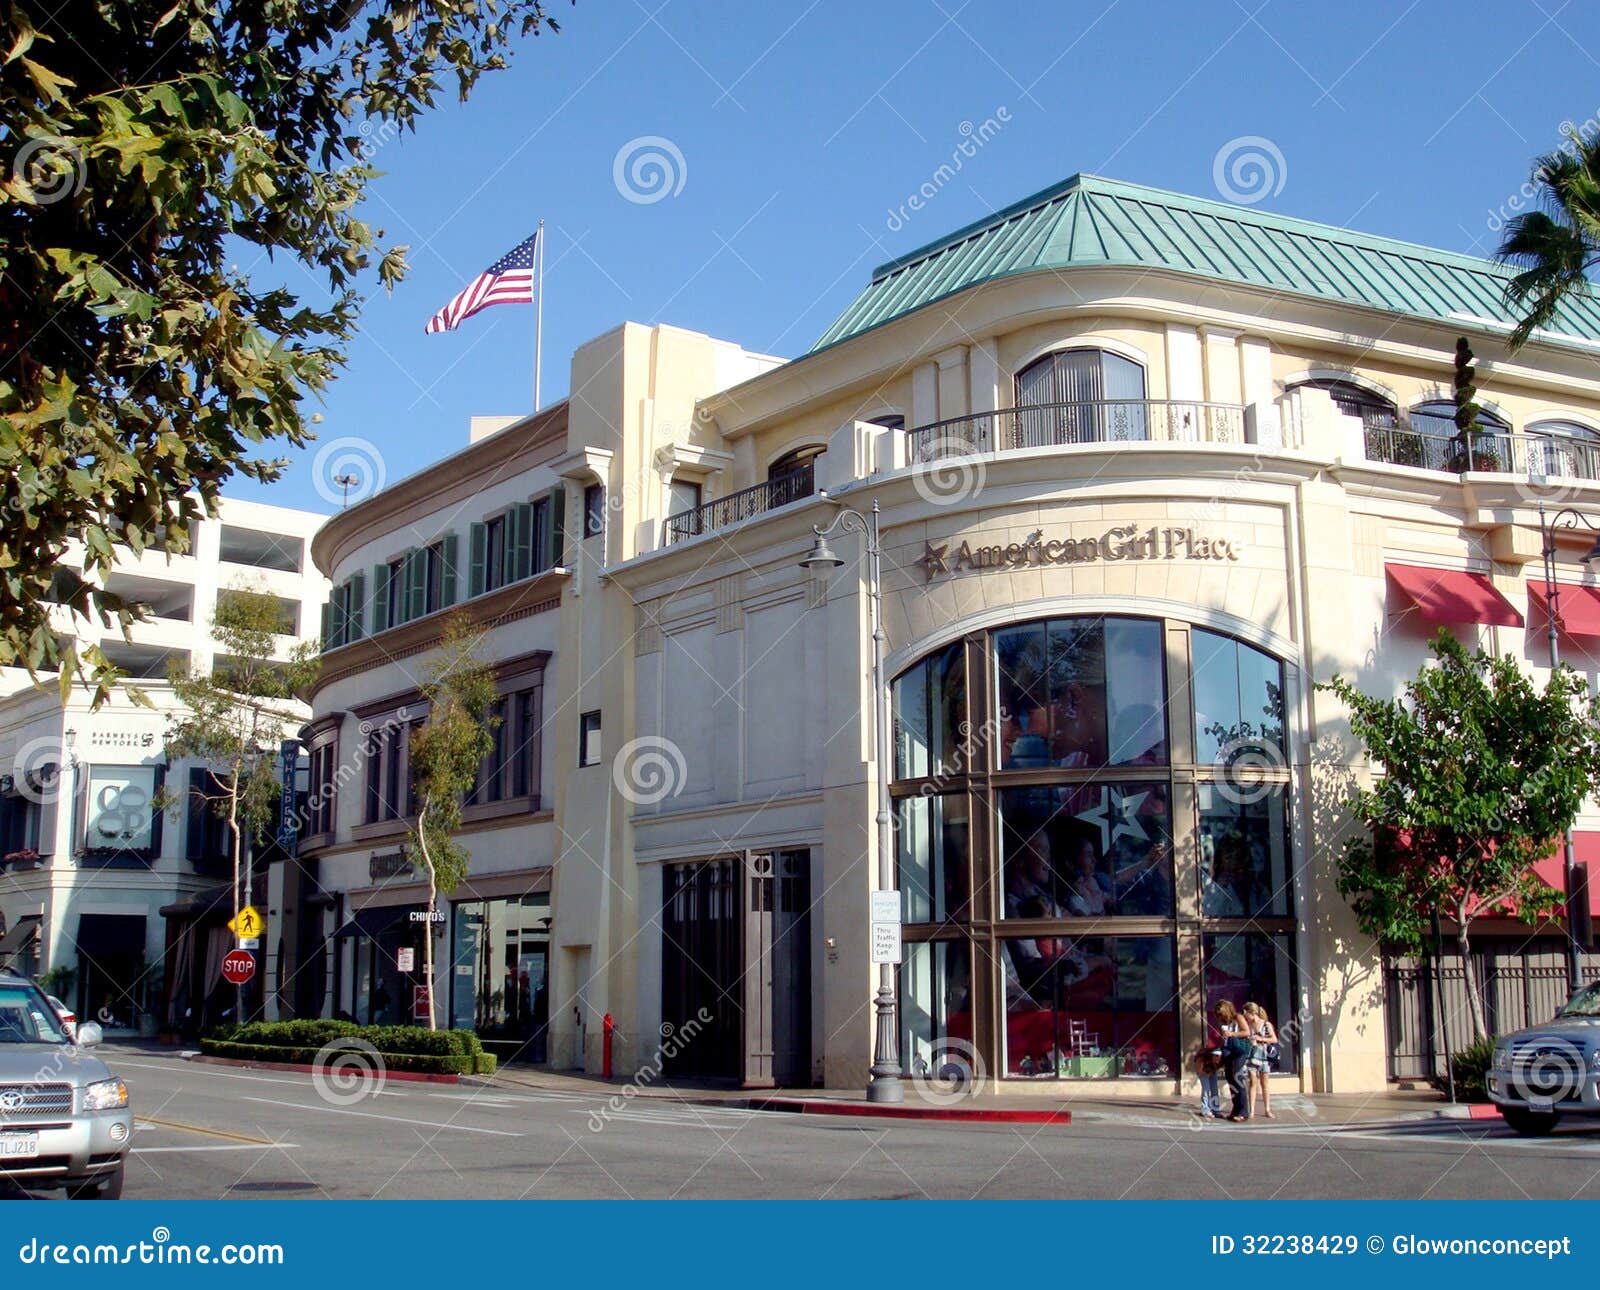 American girl place shop editorial stock image. Image of fashionable ...